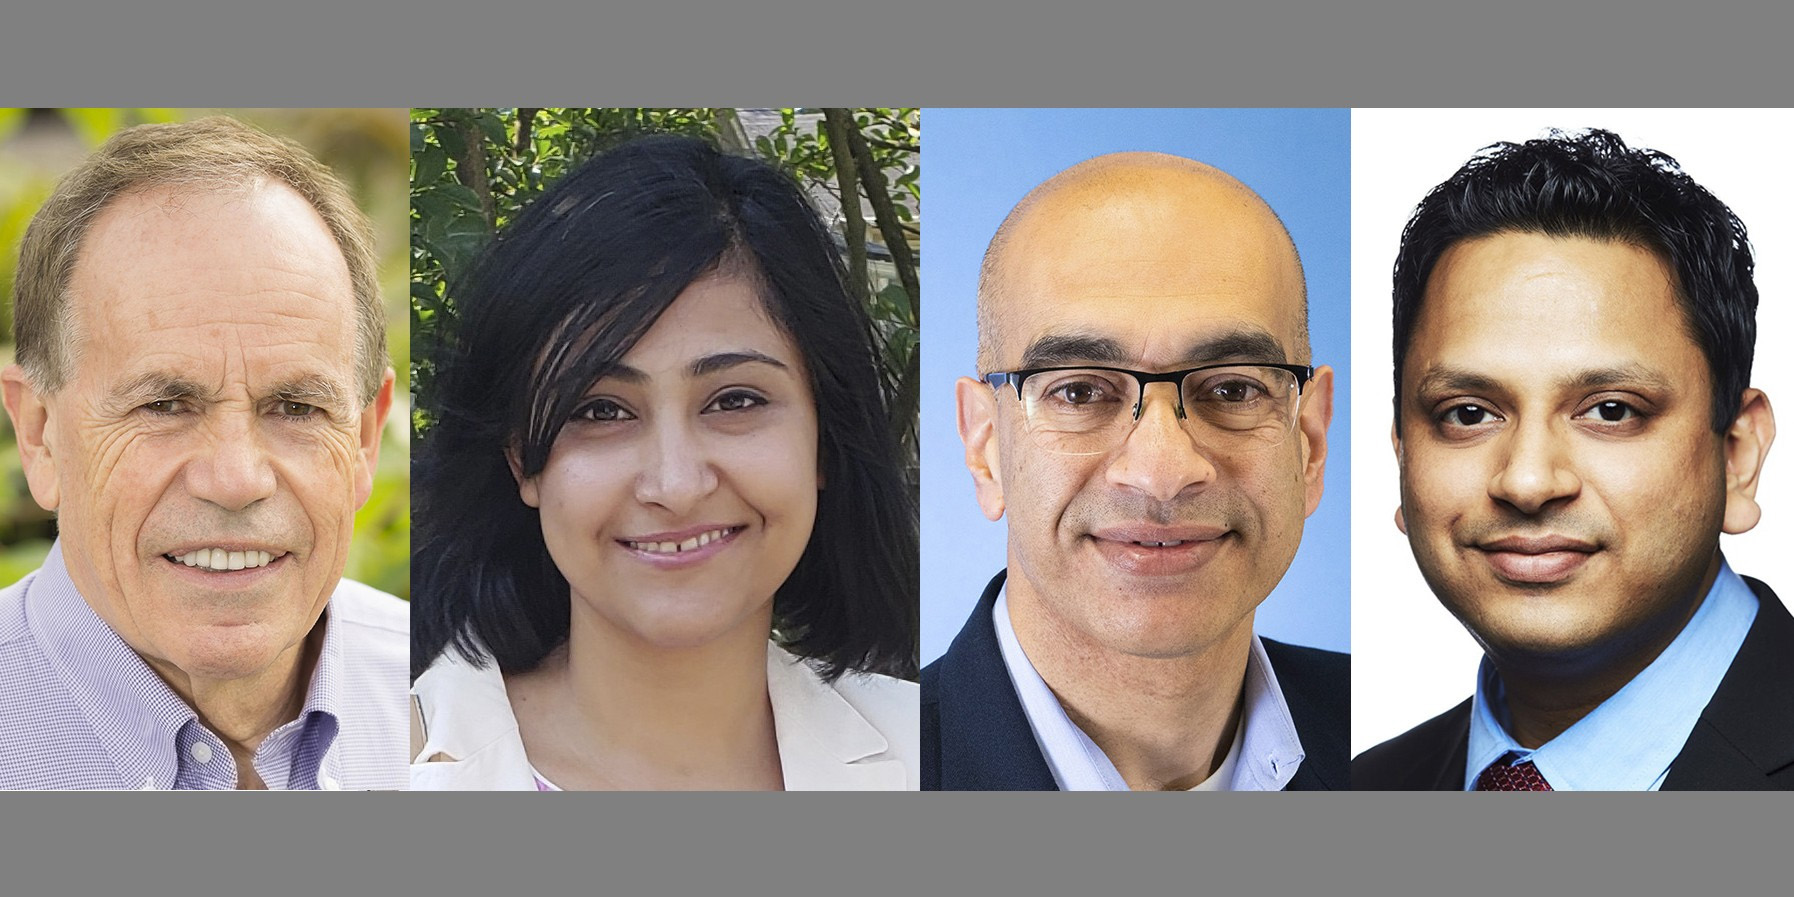 University of Illinois researchers (L to R) Steve Long, Shraddha Maitra, Vijay Singh, and Deepak Kumar conducted a series of studies on biofuel production from energycane. 